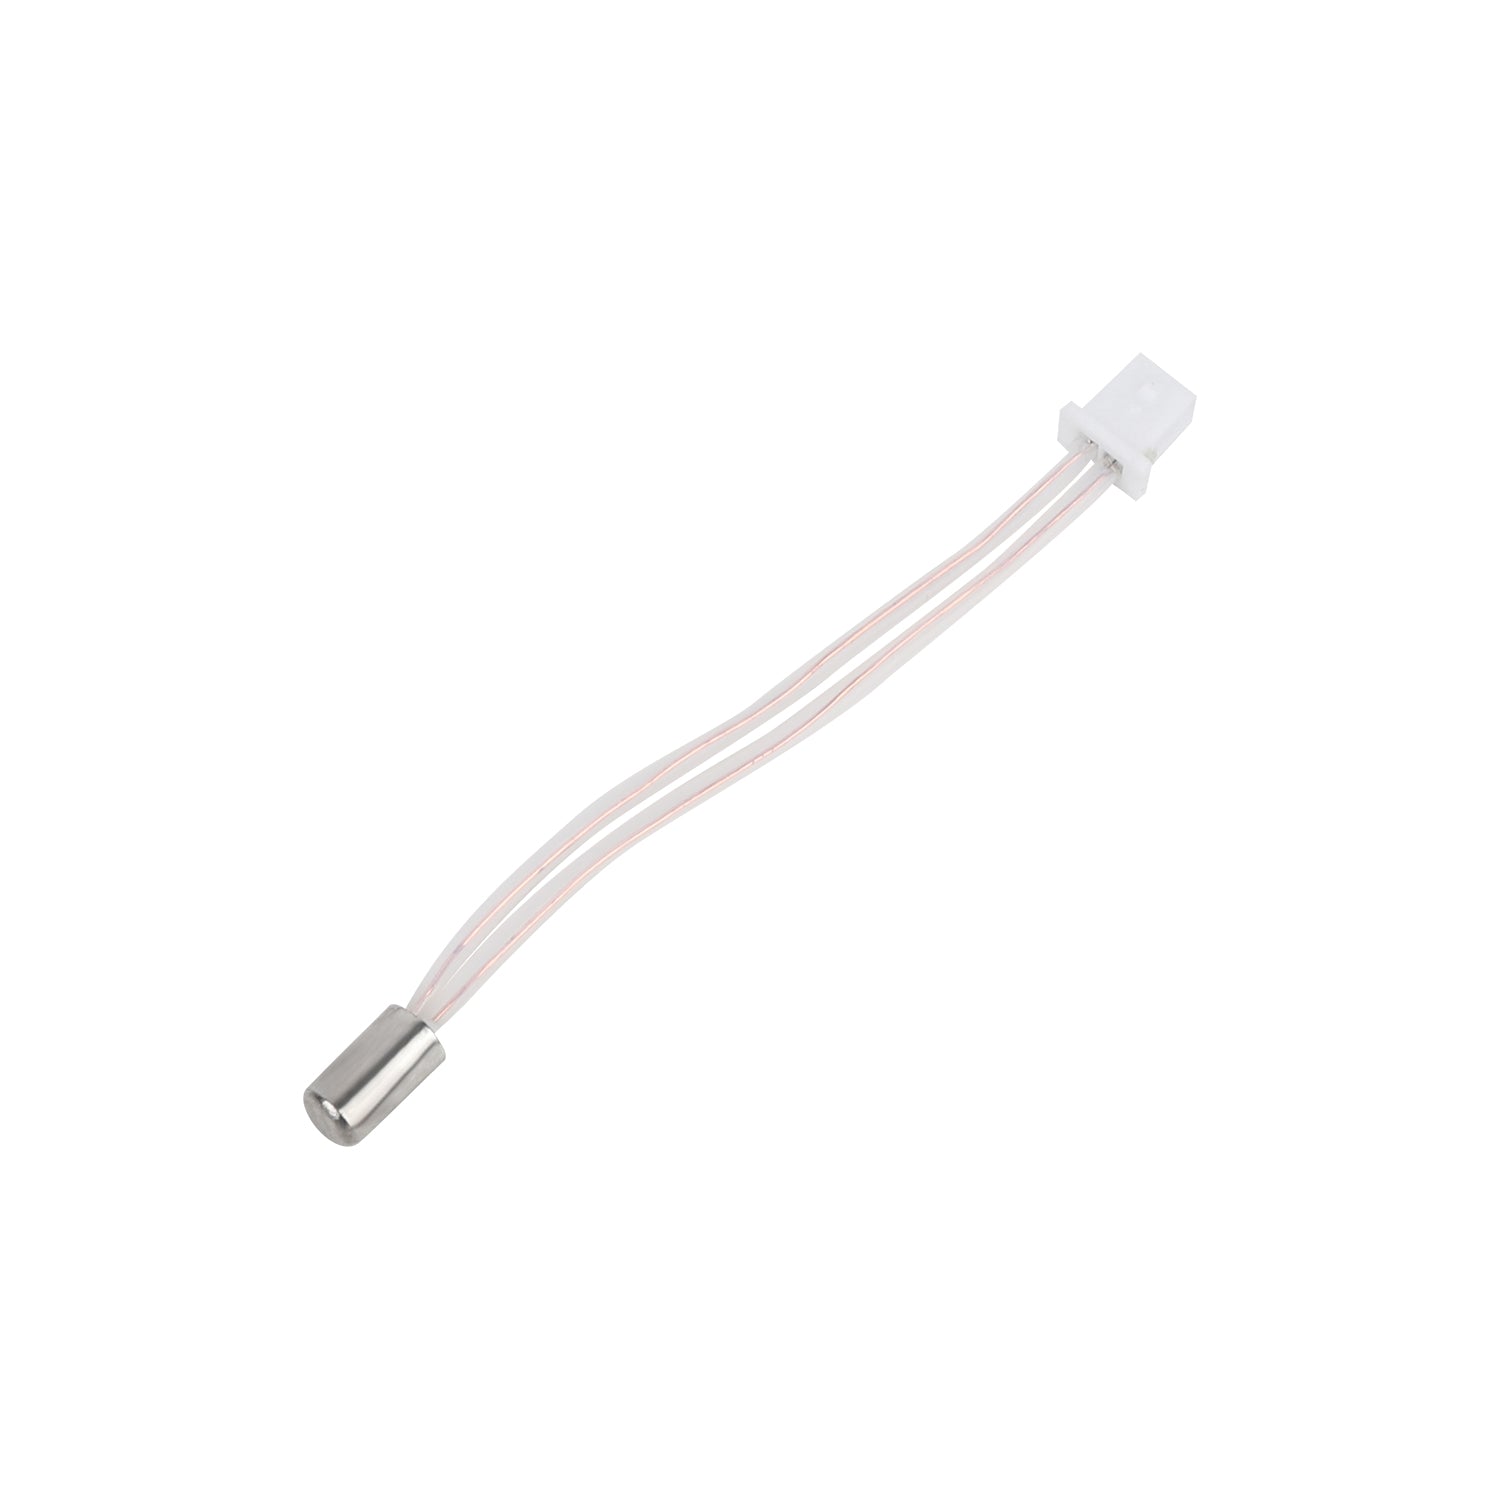 Creality Ender 3 S1 Replacement Thermistor